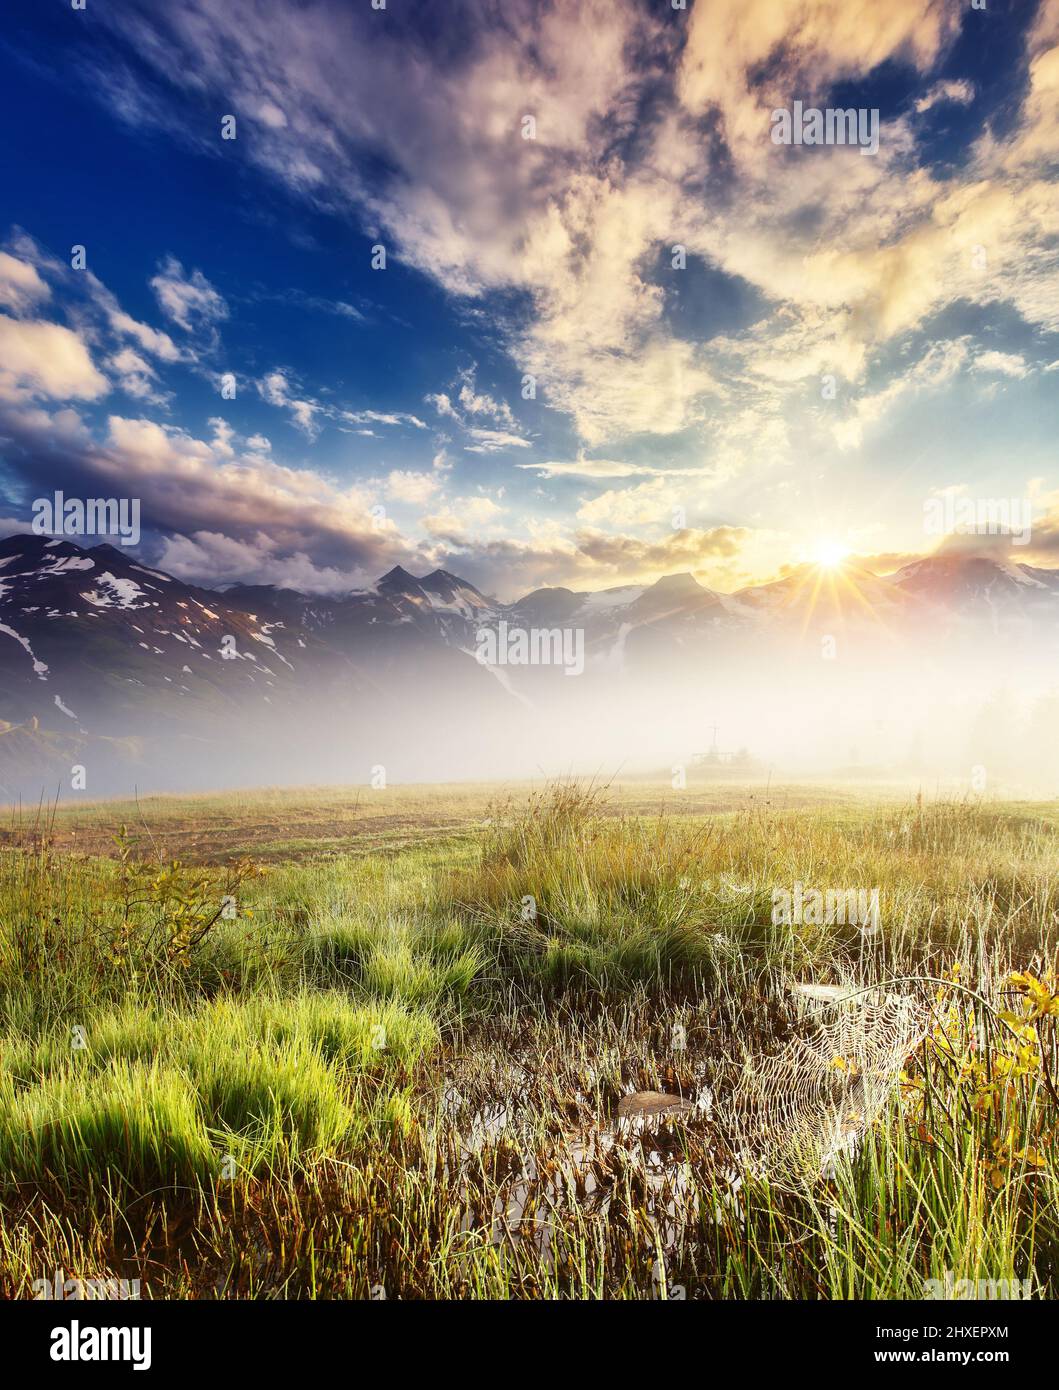 A great view of the foggy field and green grass glowing by sunlight. Dramatic and picturesque morning scene. Location place: High Alpine Road, Austria Stock Photo